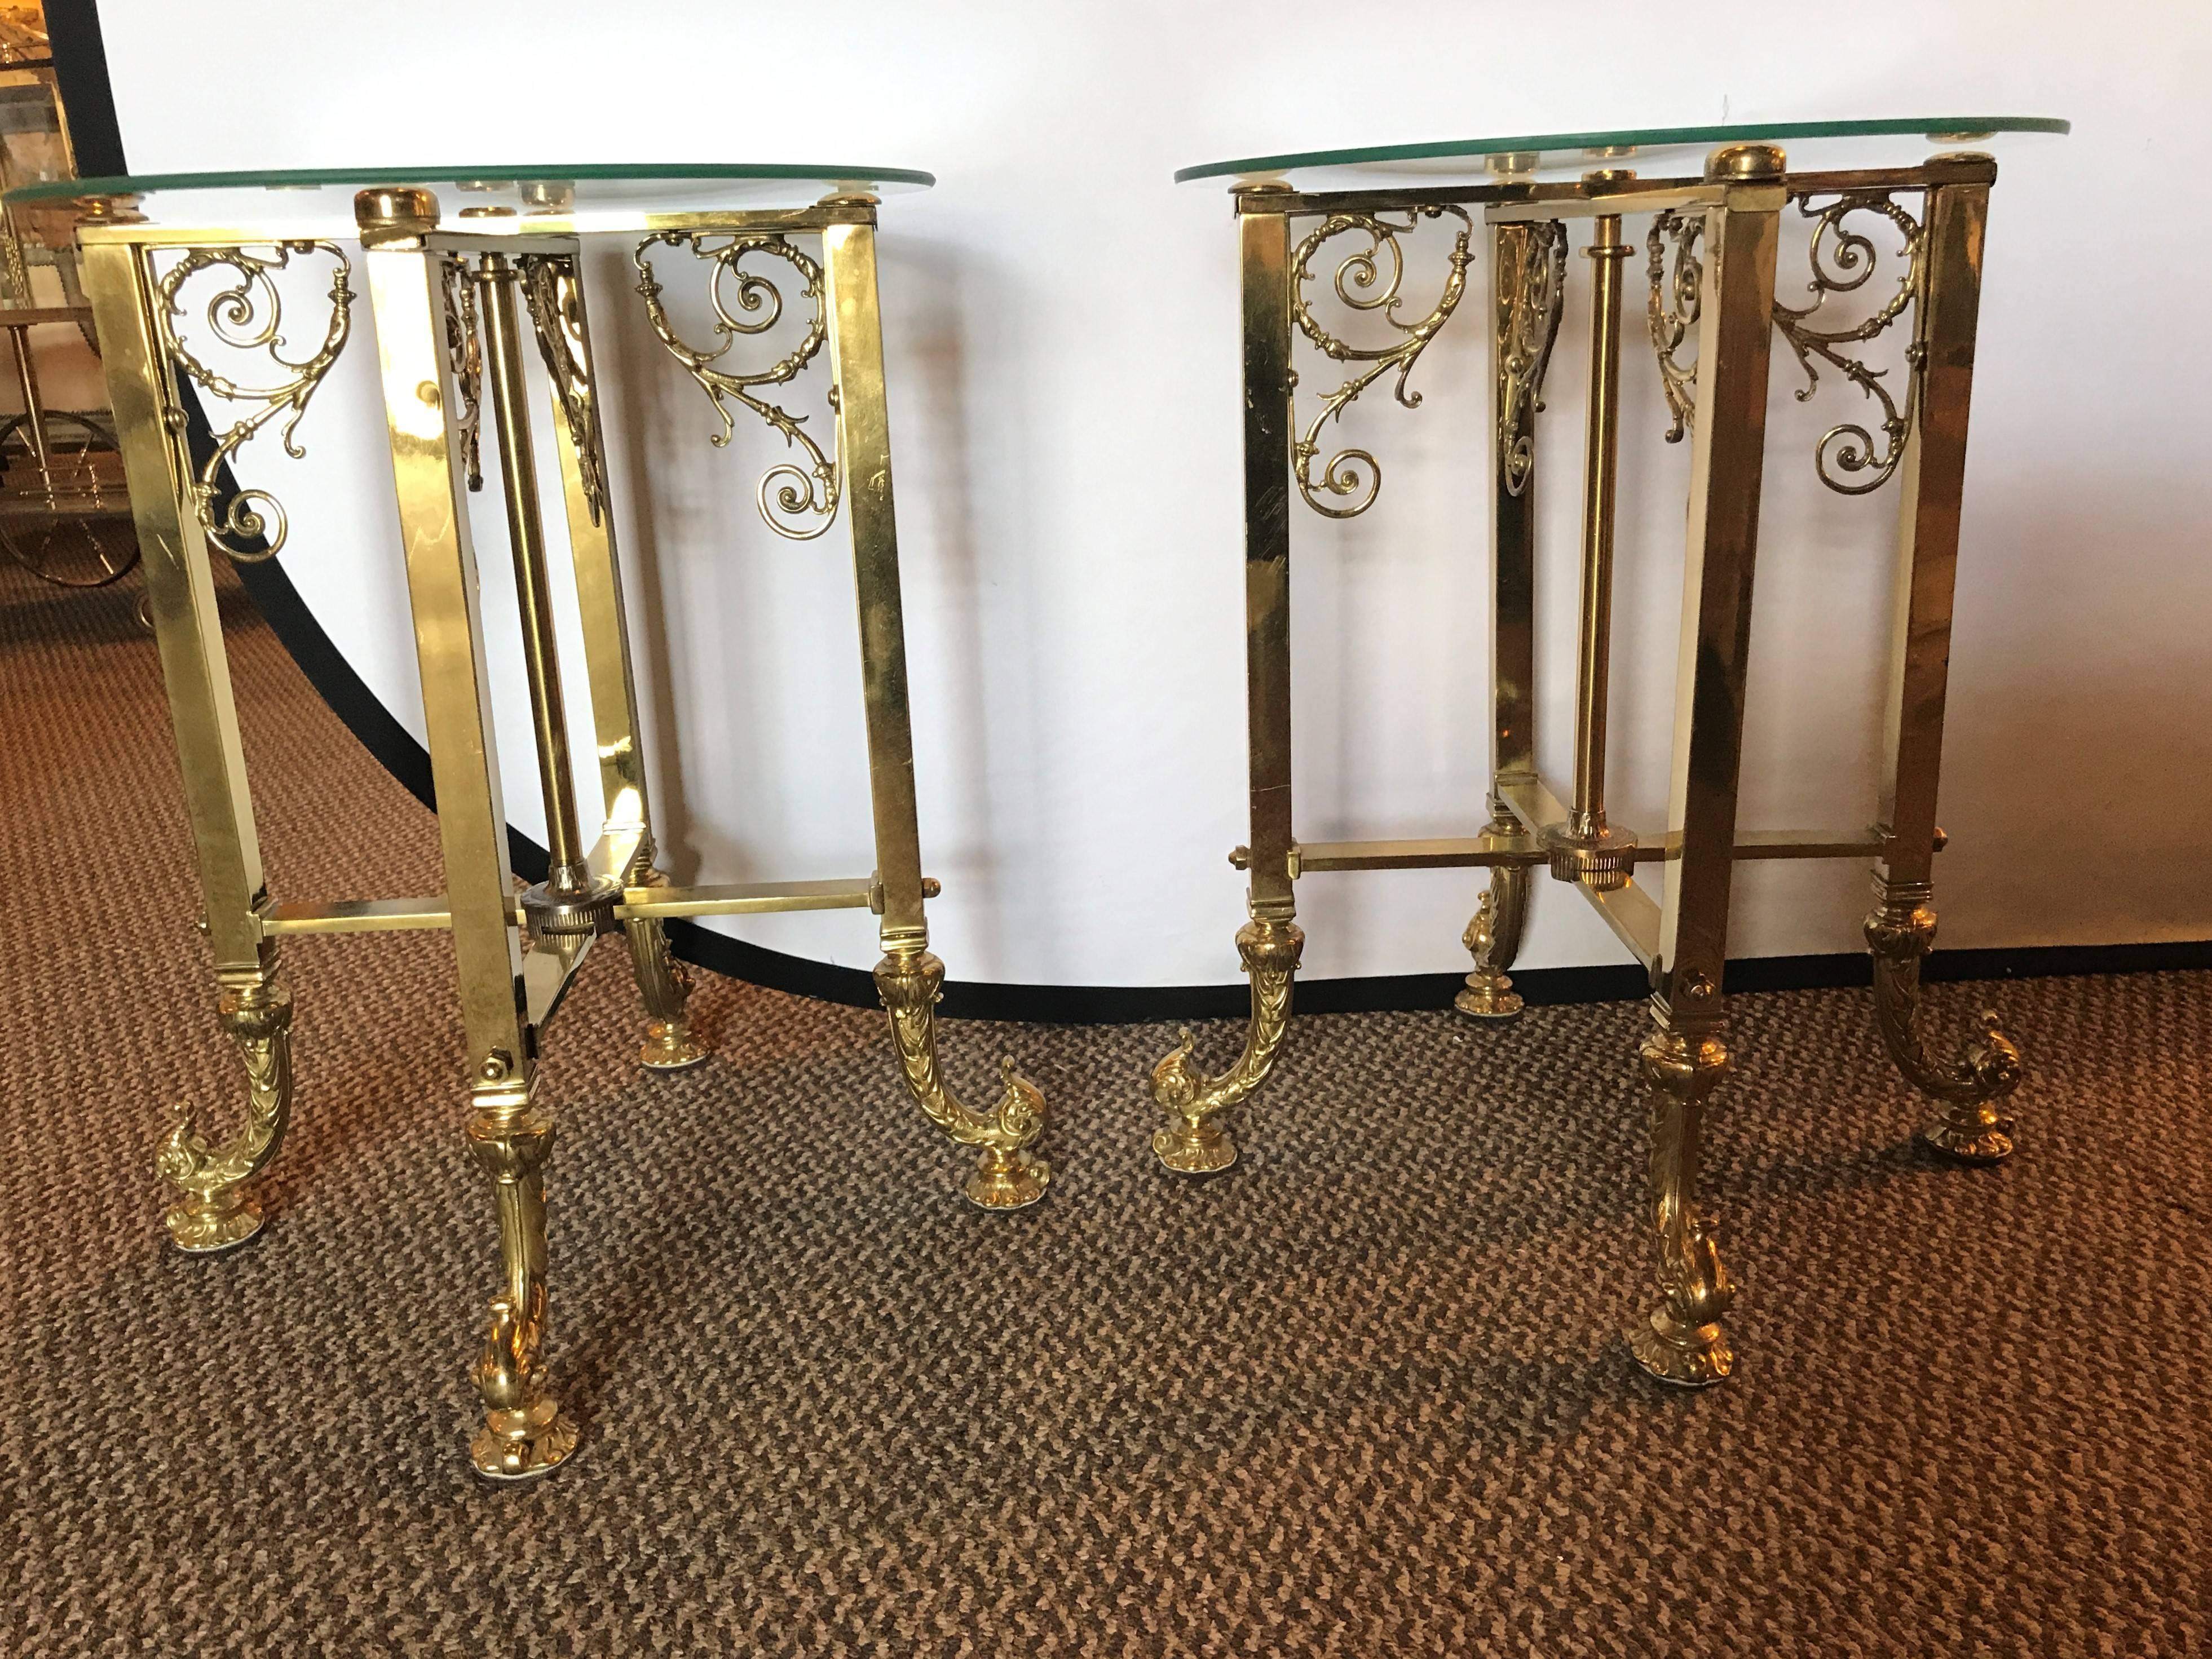 A pair of fine bronze based end tables with glass tops. Hollywood Regency pair of bronze end tables with scroll and vine design each having a circular glass top. Both tables have a locking mechanistic which pulls up and down from the center bar.